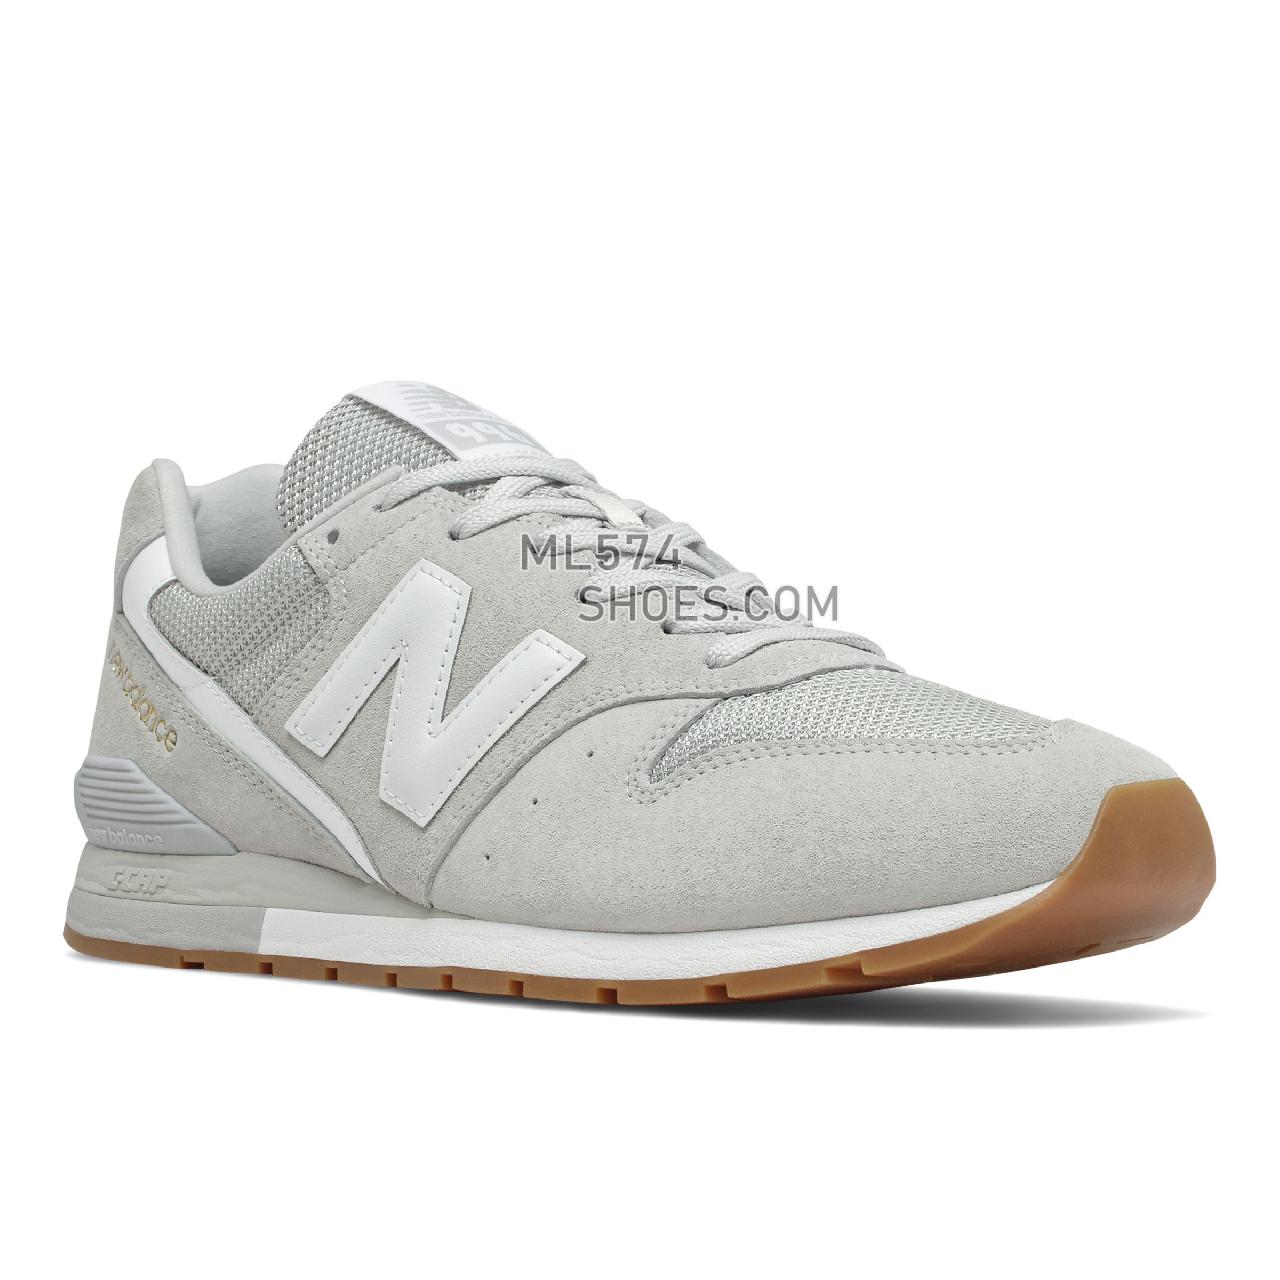 New Balance 996v2 - Men's Classic Sneakers - Summer Fog with White - CM996CPS